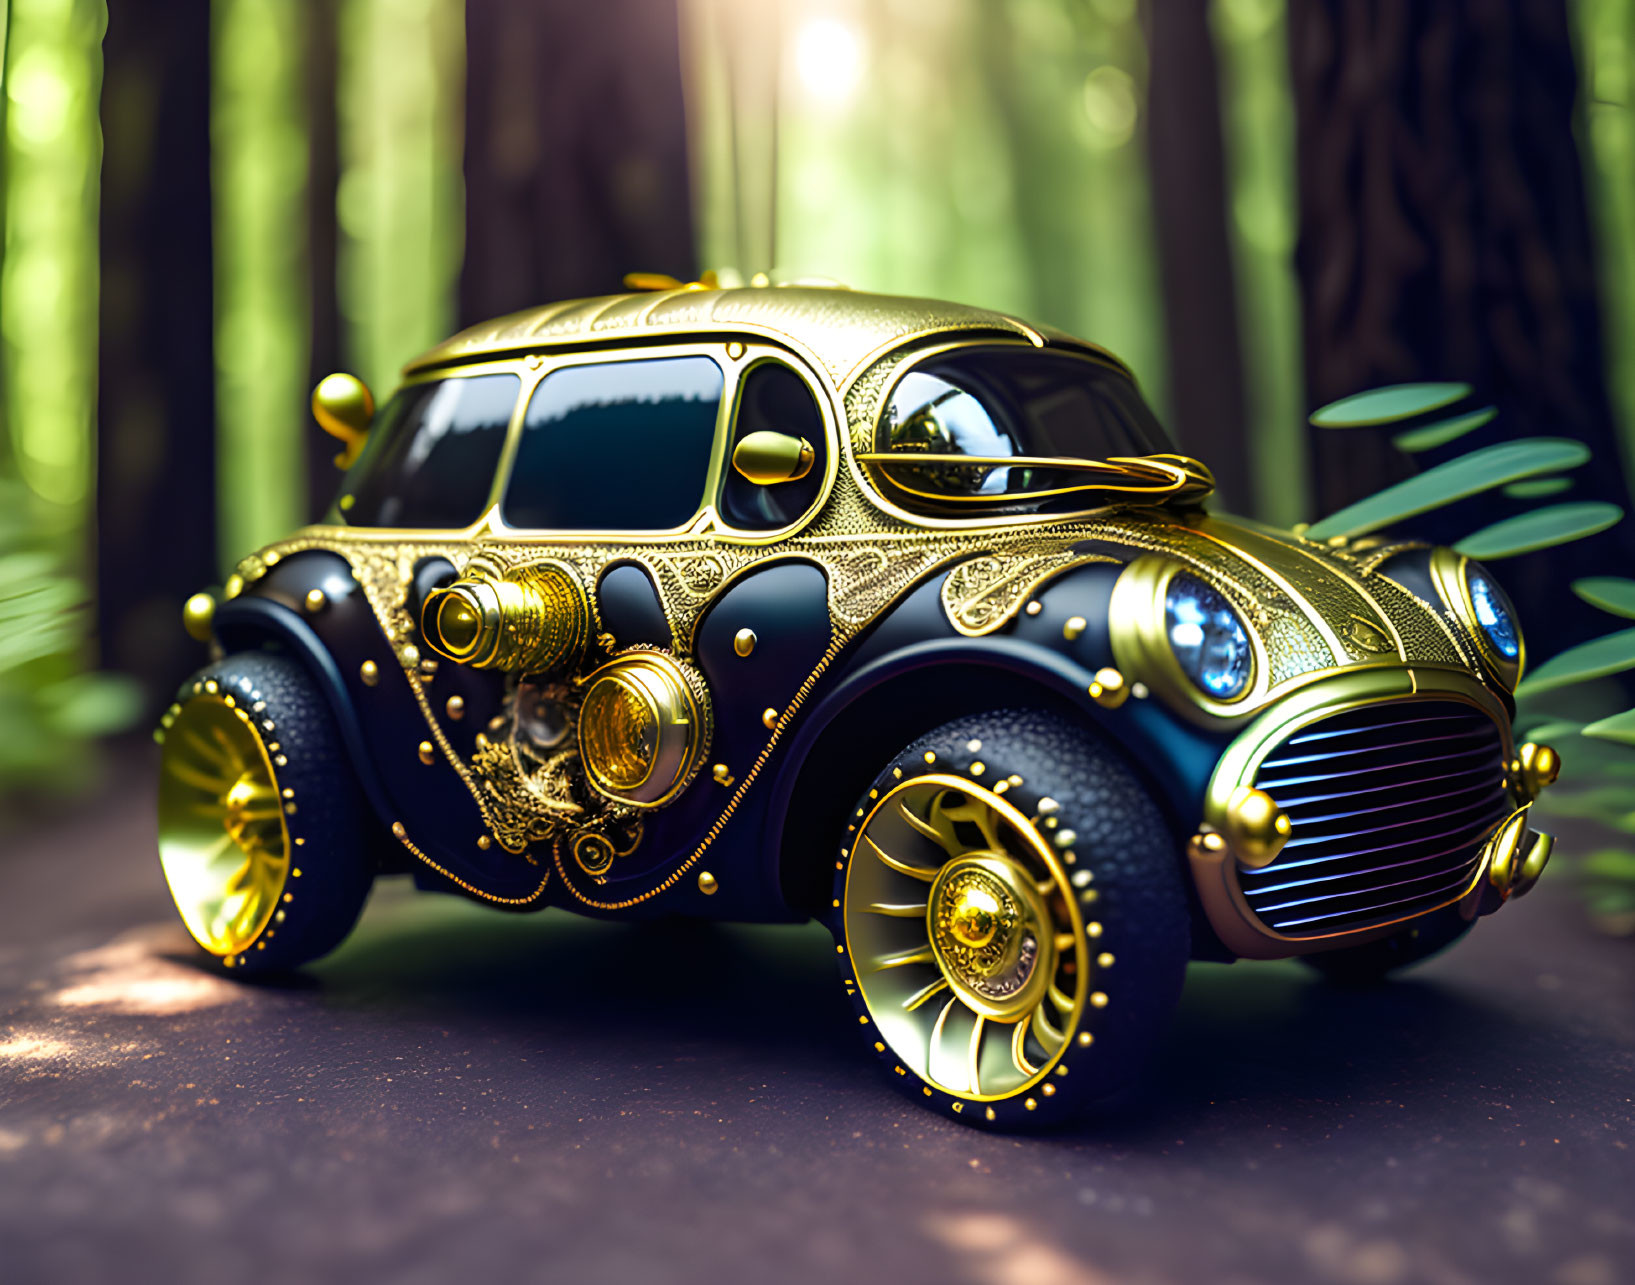 Vintage Car with Gold Embellishments in Forest Sunlight